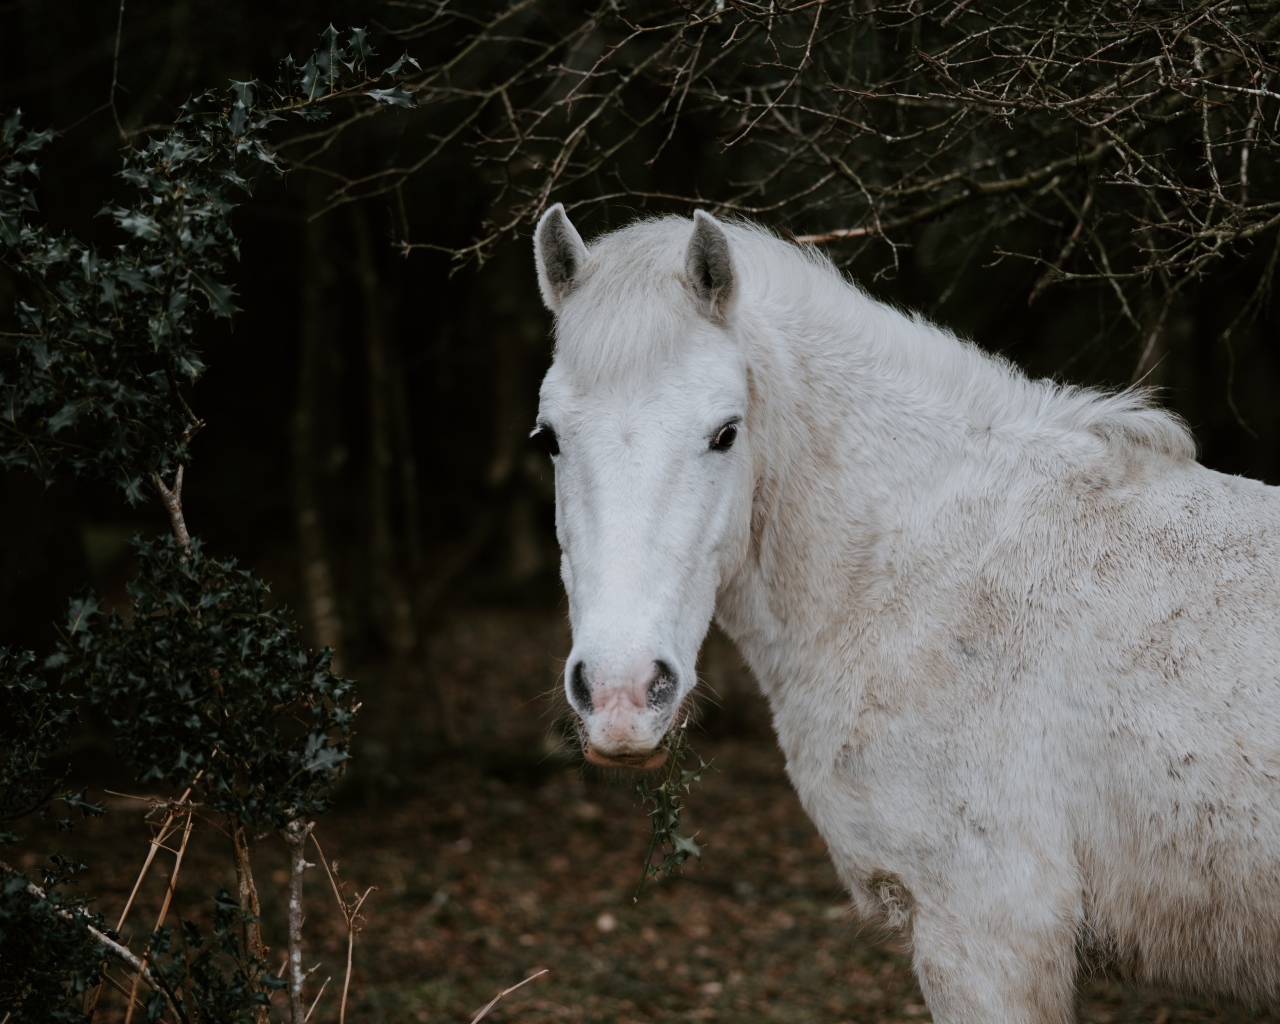 White horse grazing in the forest